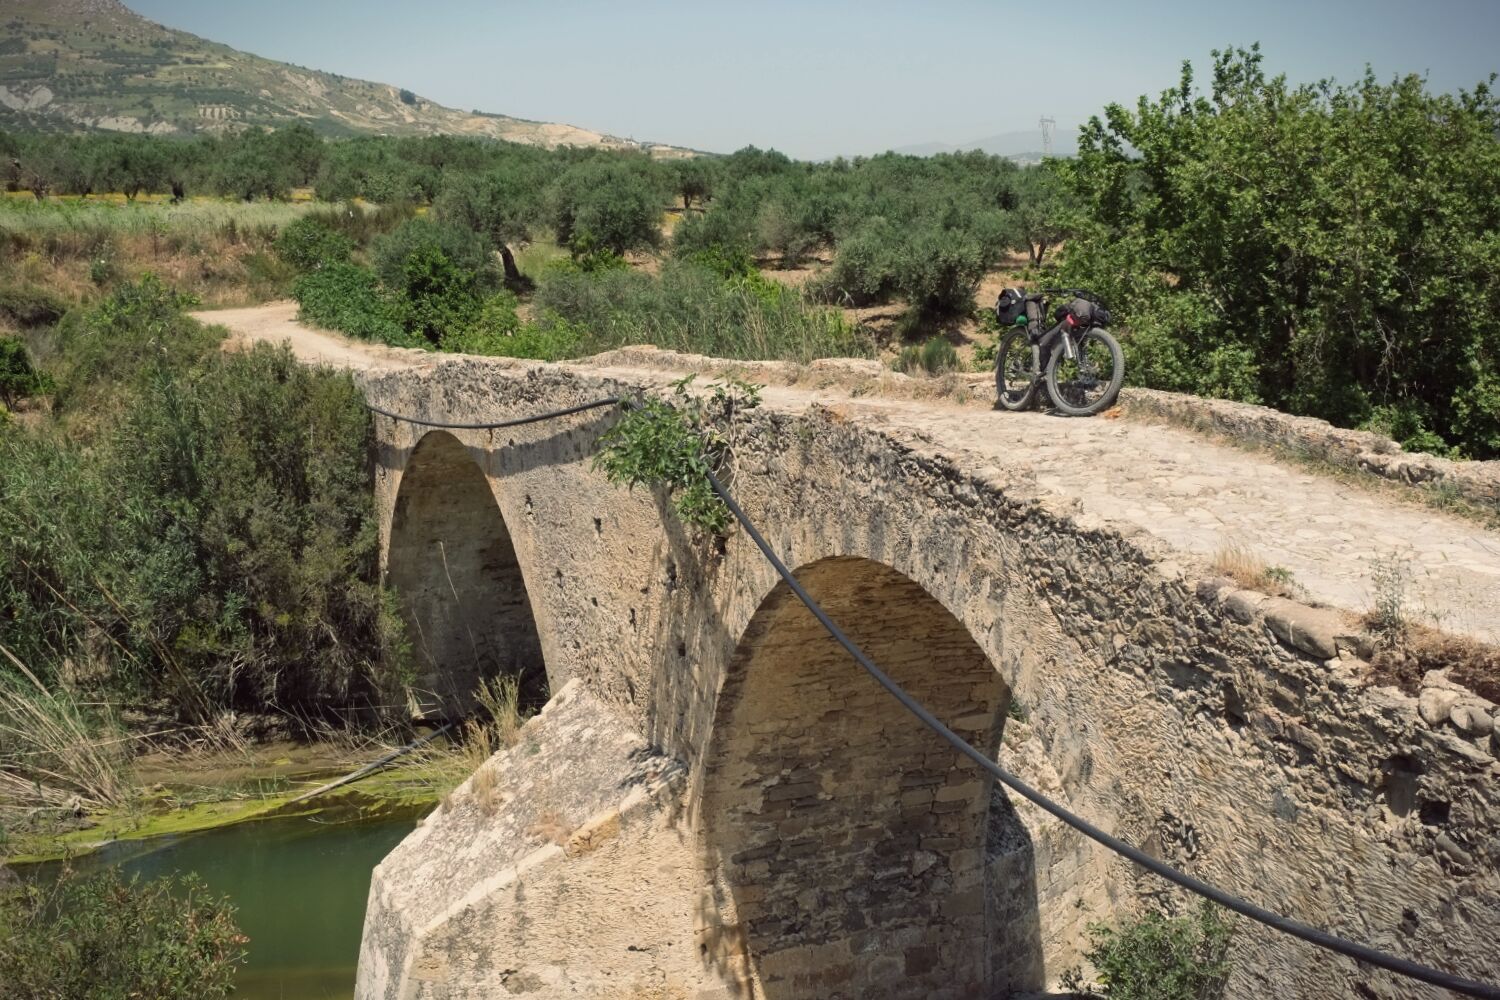 Stumbled across a beautiful old stone bridge hidden in the olive groves near the village of Skinias. No idea how old... but it's cobbled road bed barely wide enough for a cart suggests 'quite old'...